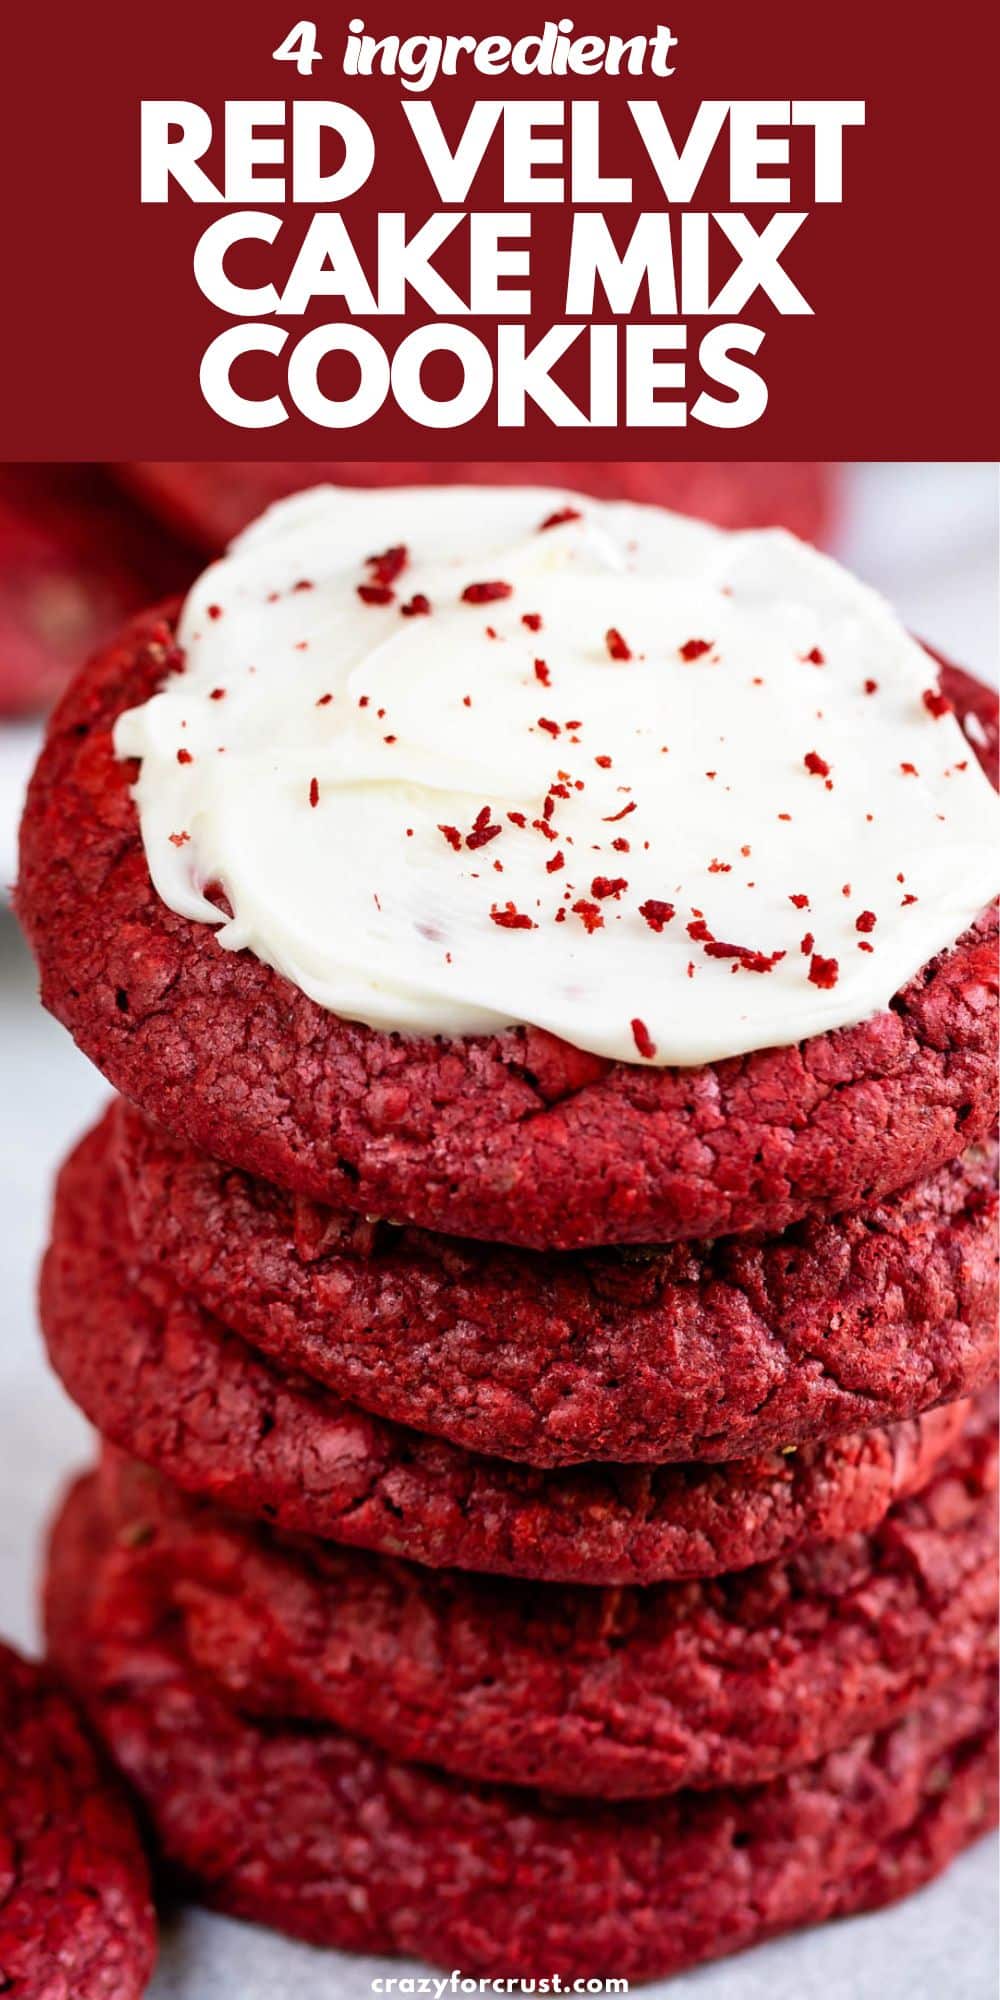 stack of red velvet cookies the top one has frosting